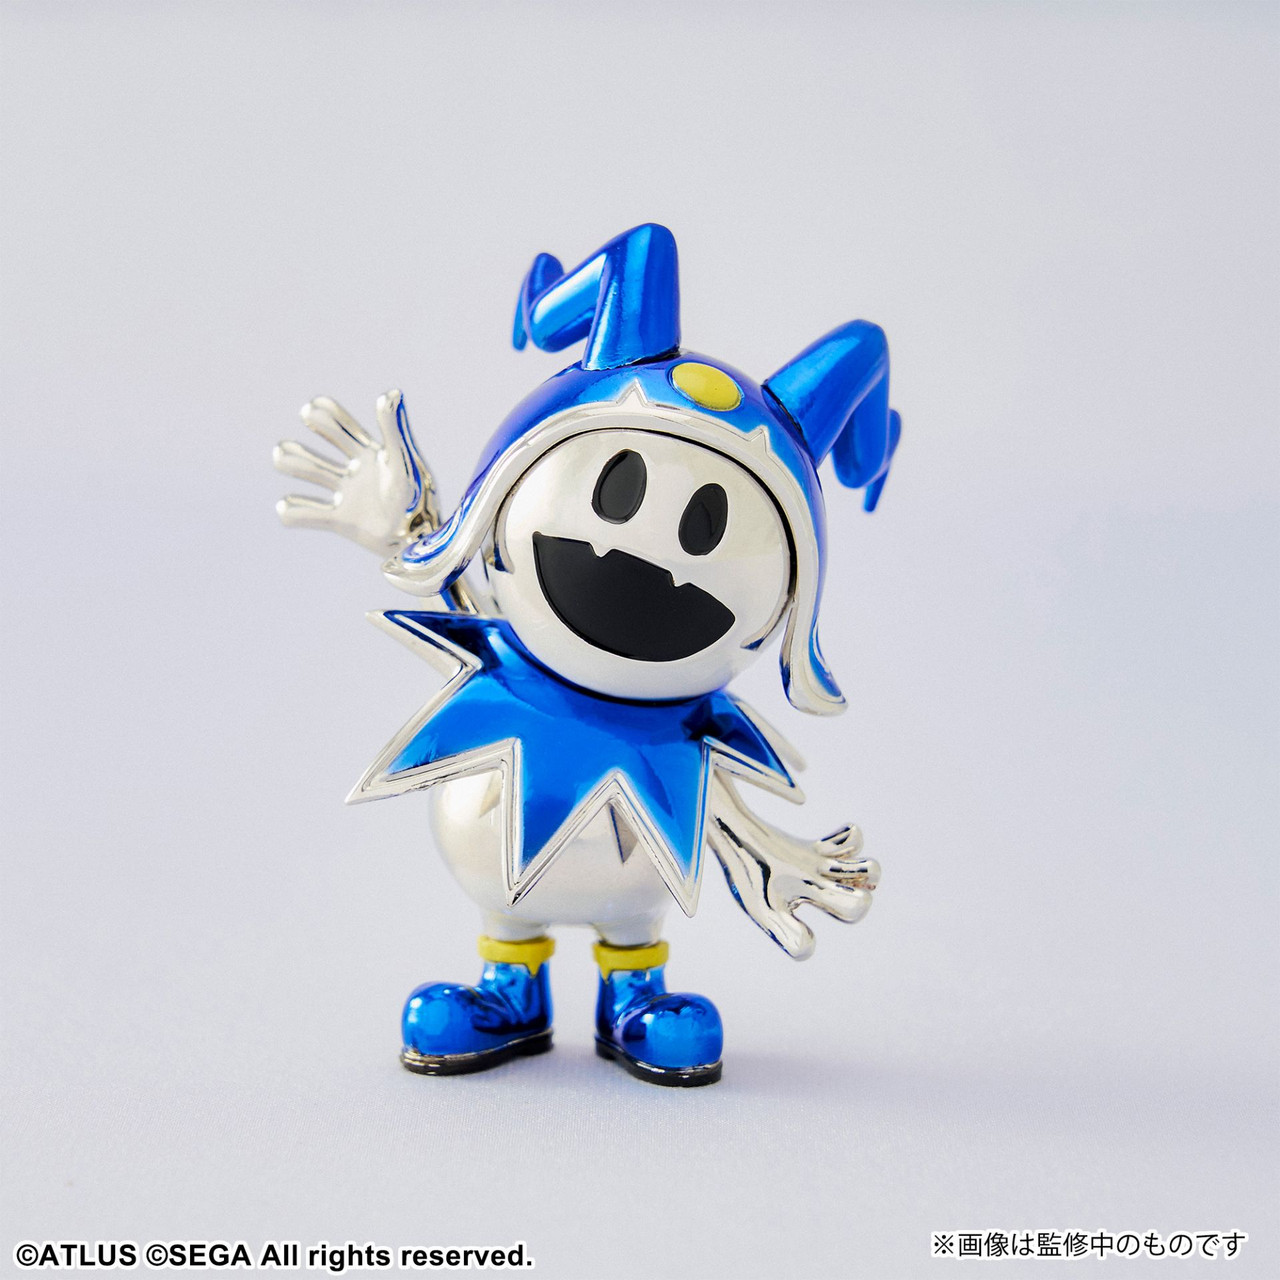 How to Build a Persona: Jack Frost